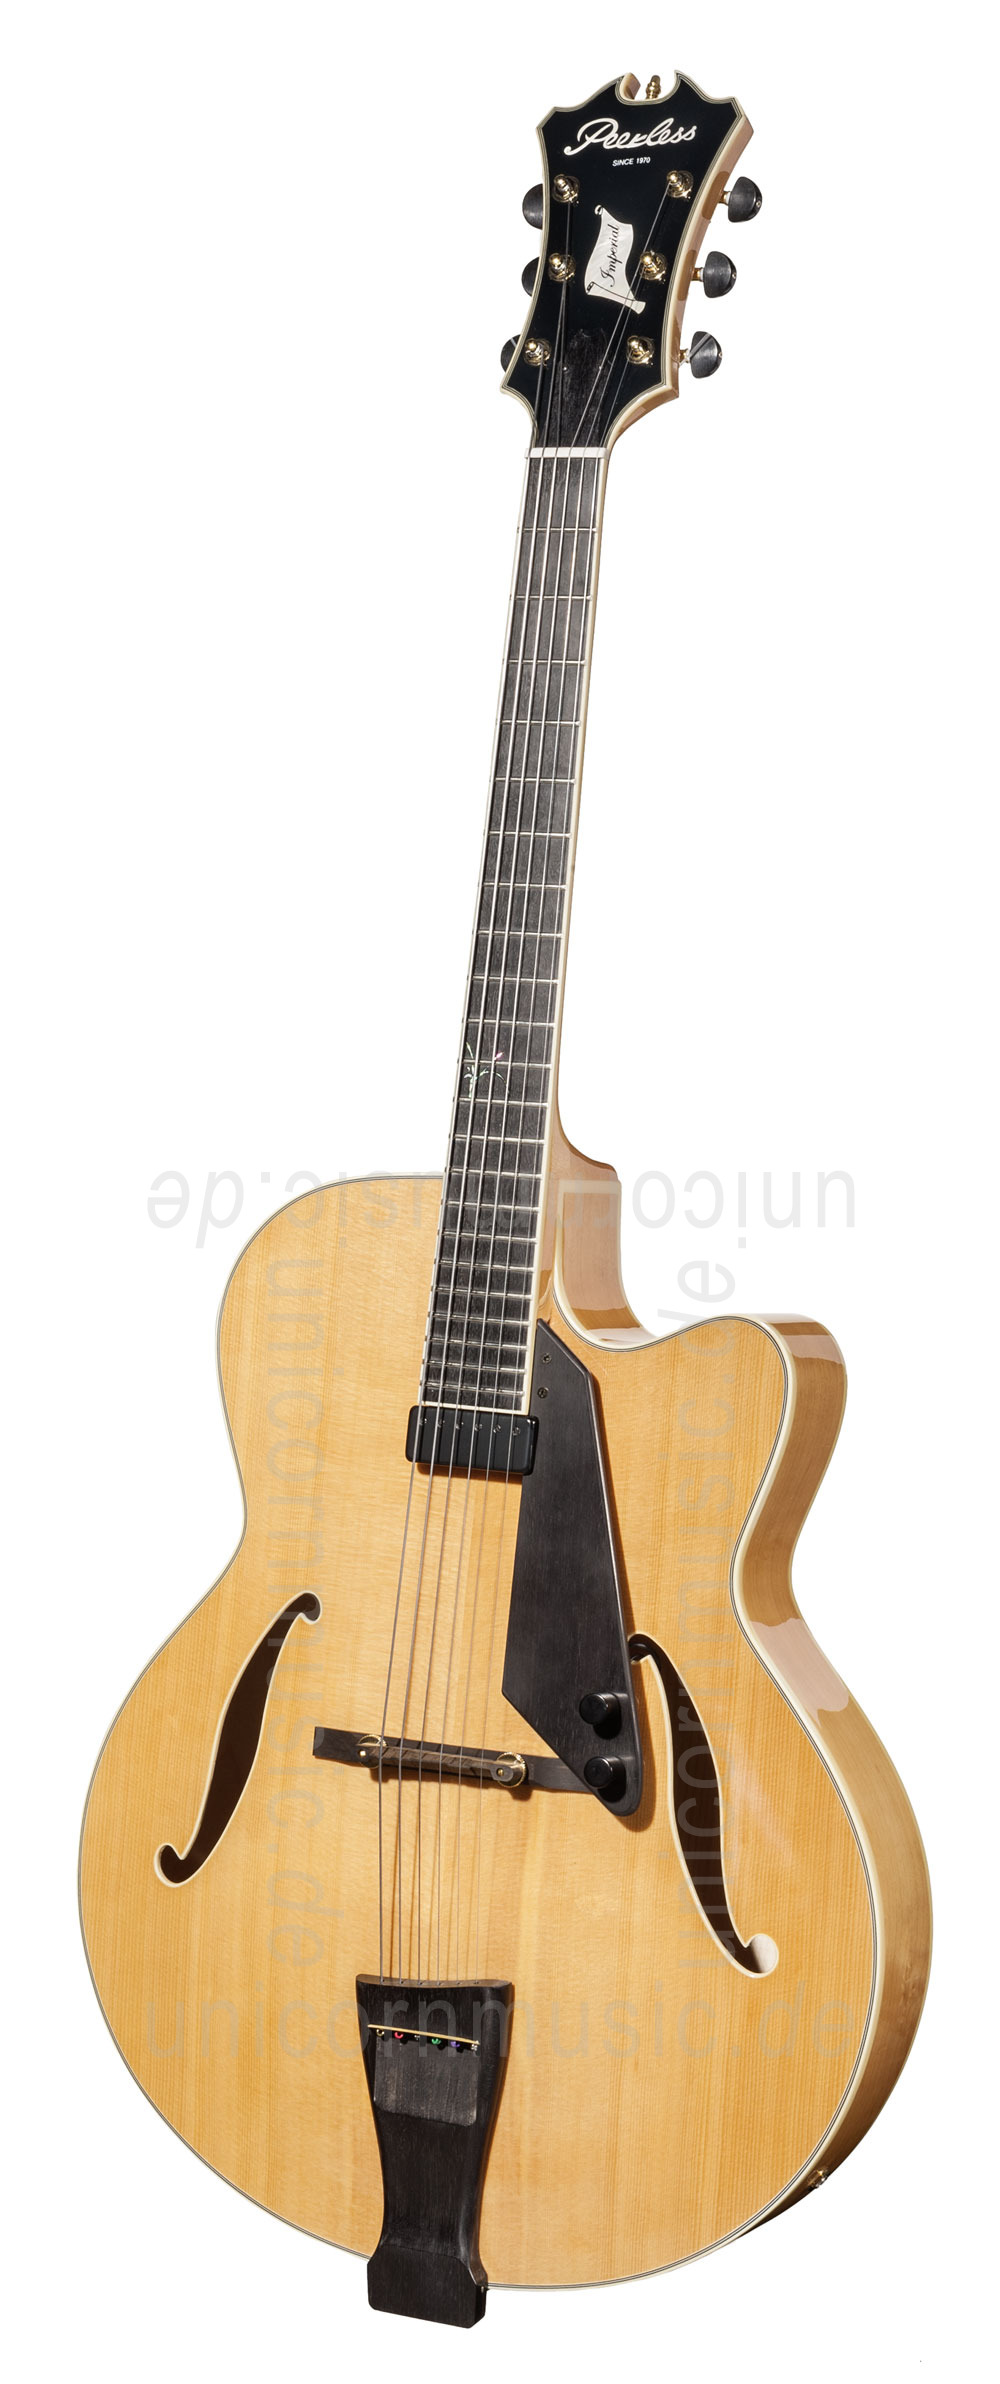 to article description / price Full-Resonance Archtop Jazz Guitar - PEERLESS IMPERIAL + hardcase - all solid